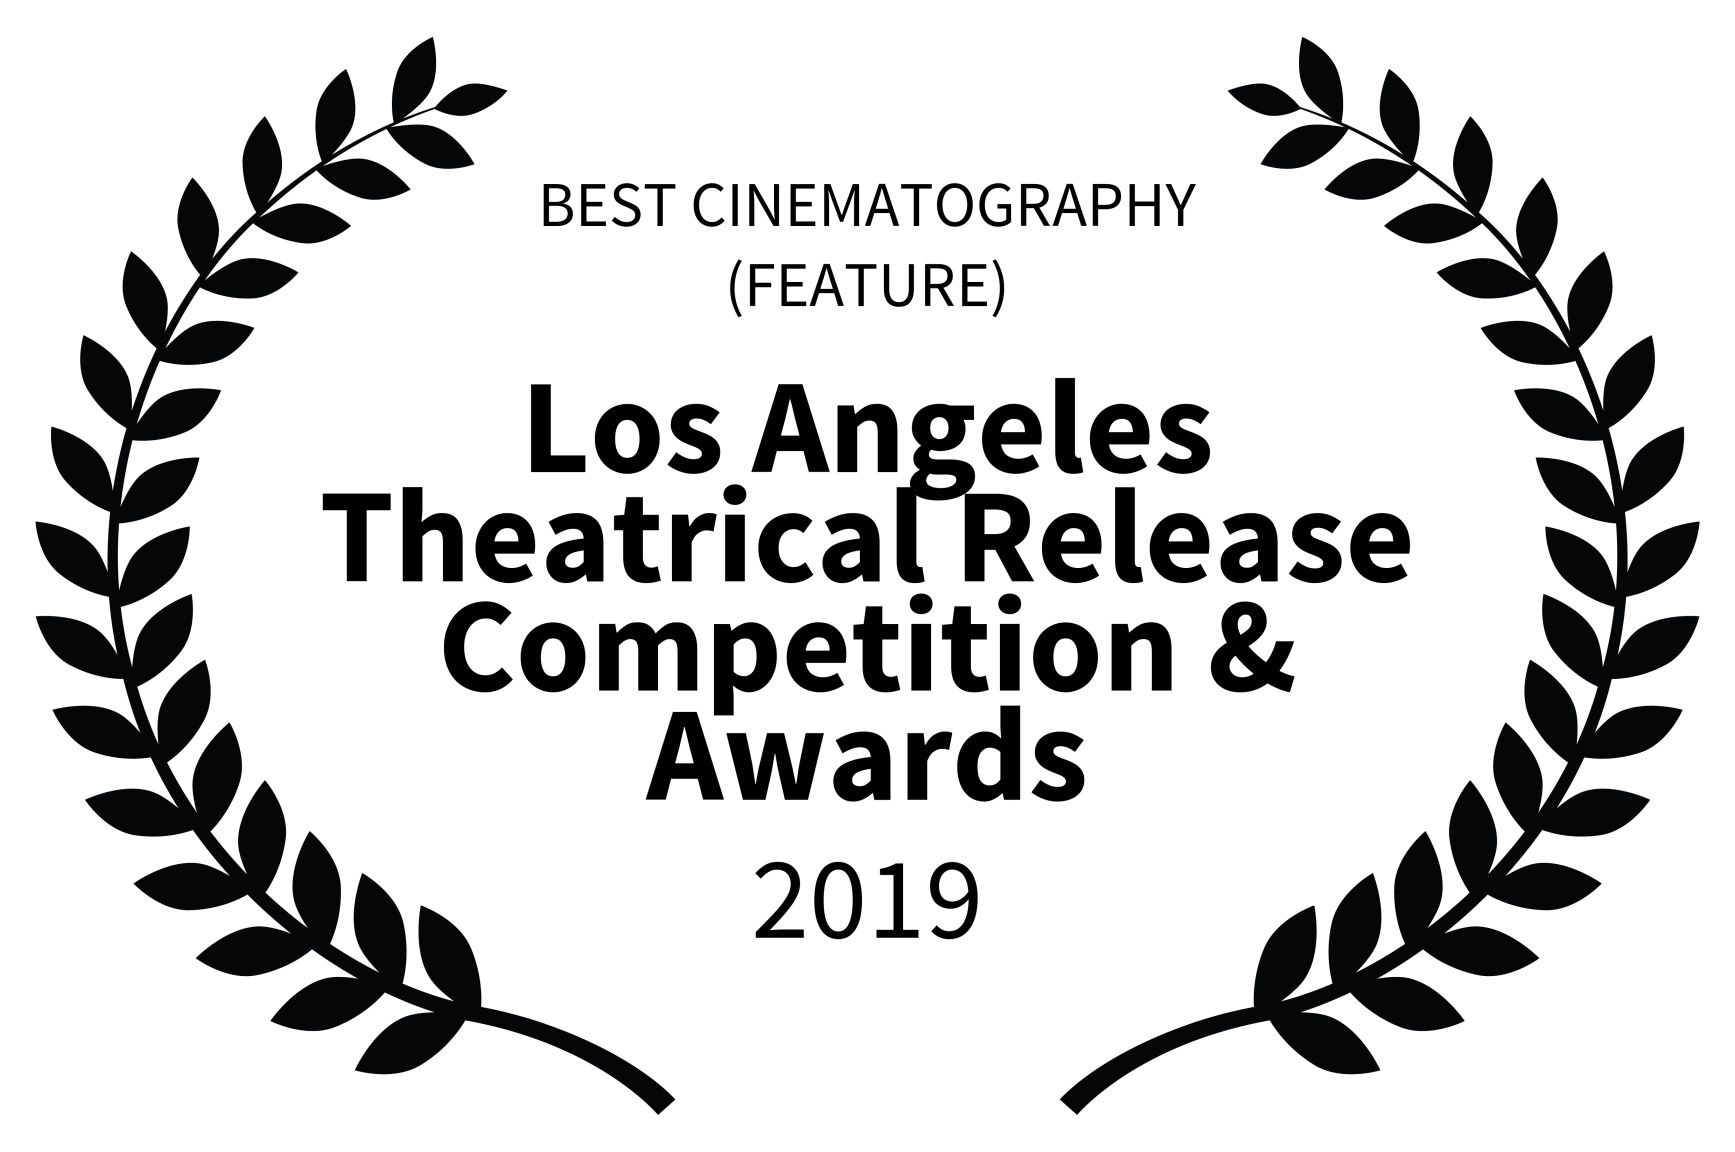 Los Angeles Theatrical Release Competition & Awards